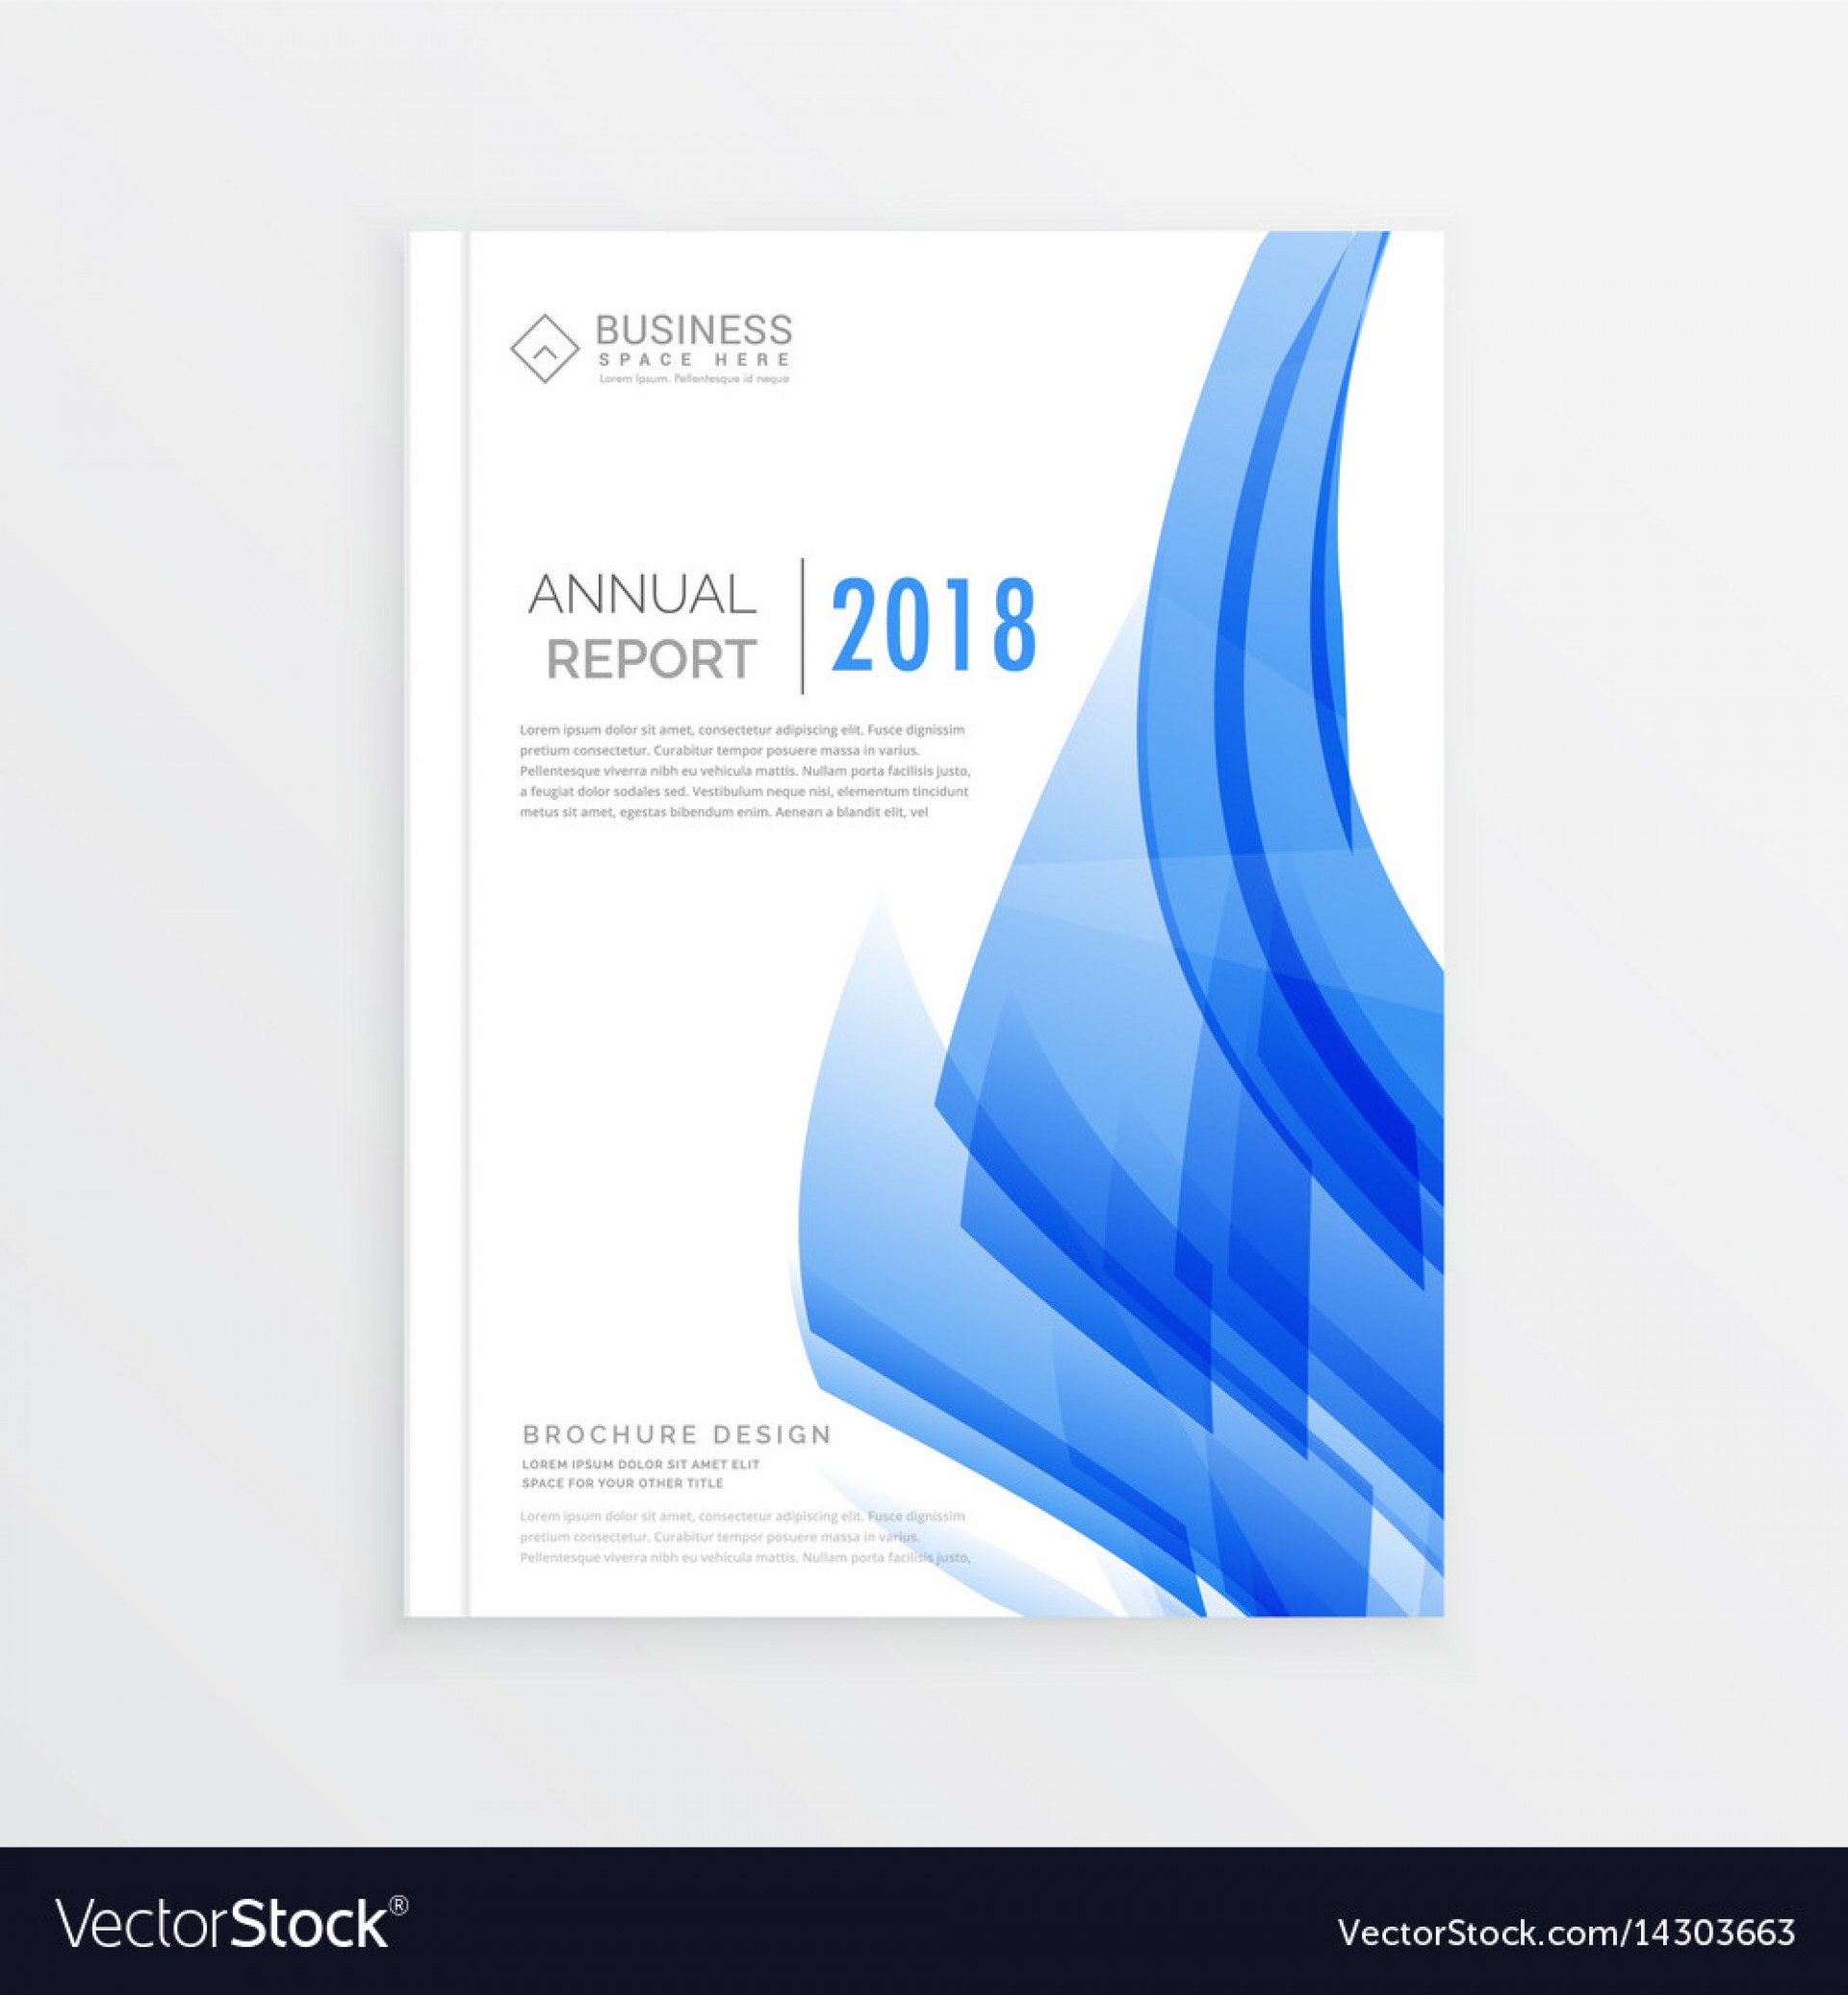 011 Template Ideas Report Cover Page Marvelous Annual Throughout Word Report Cover Page Template